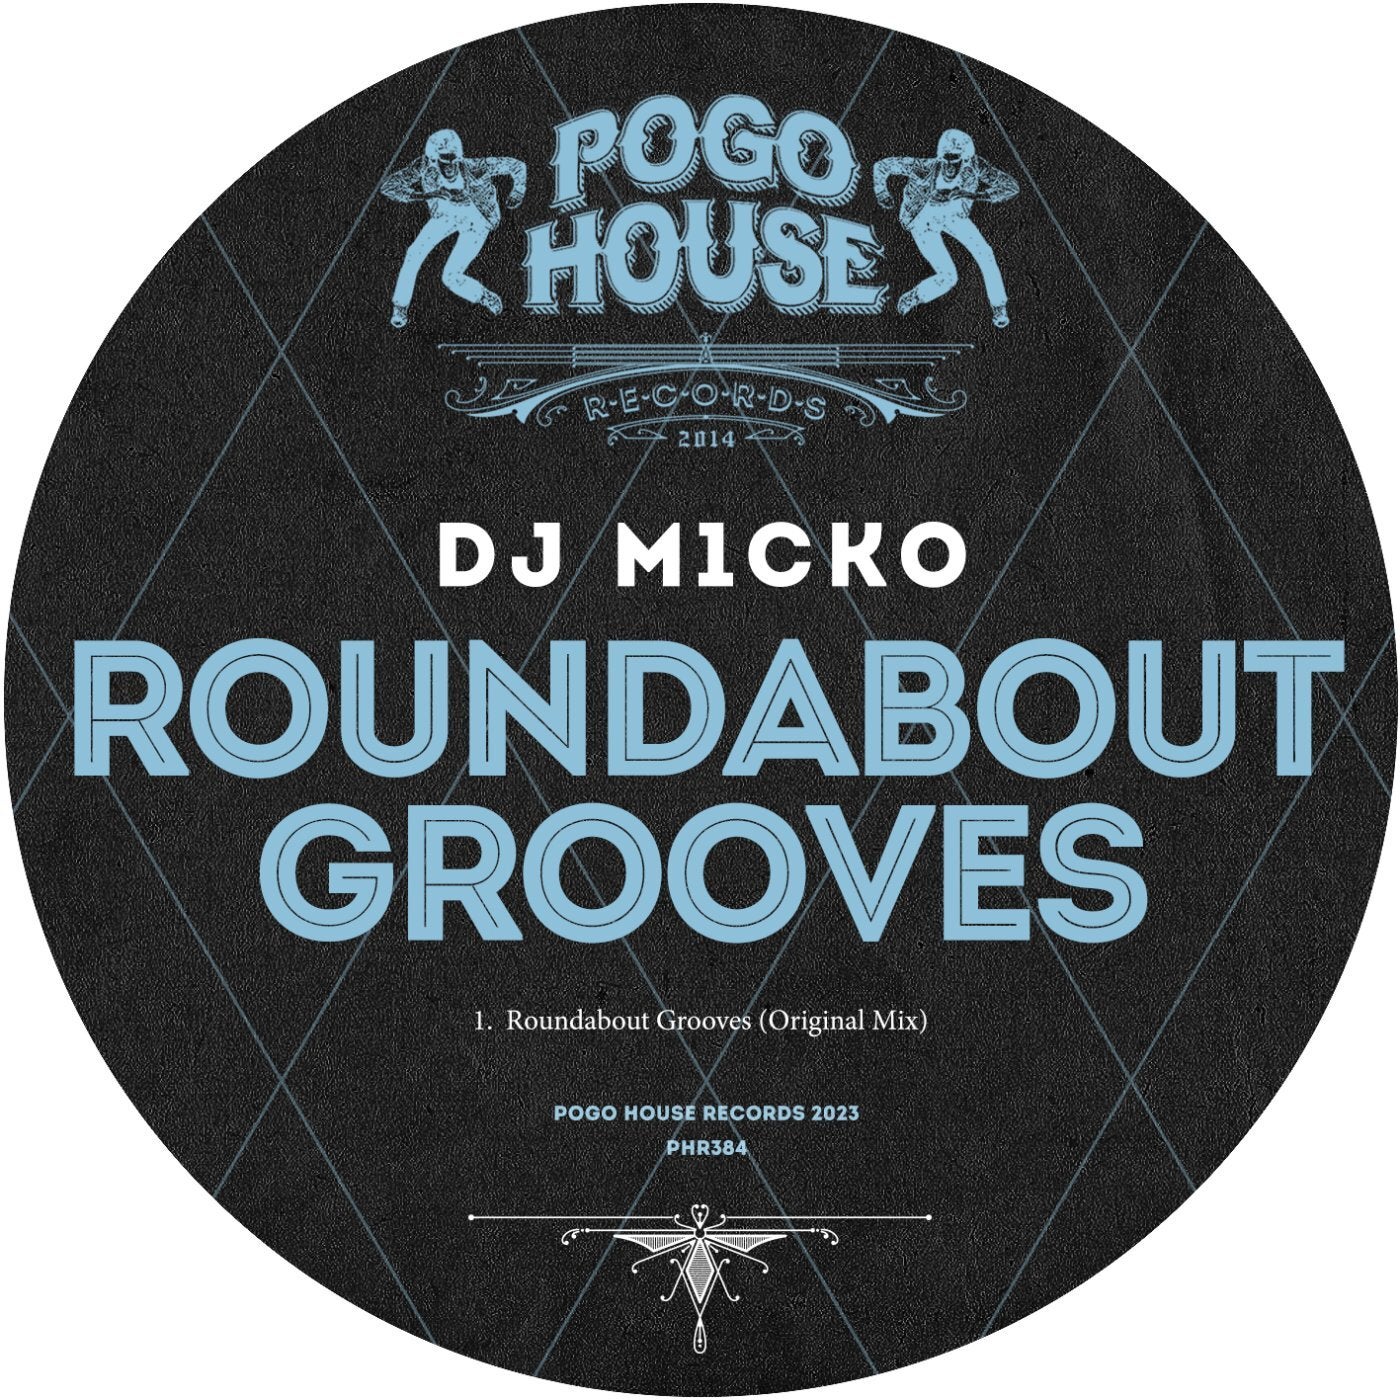 Roundabout Grooves